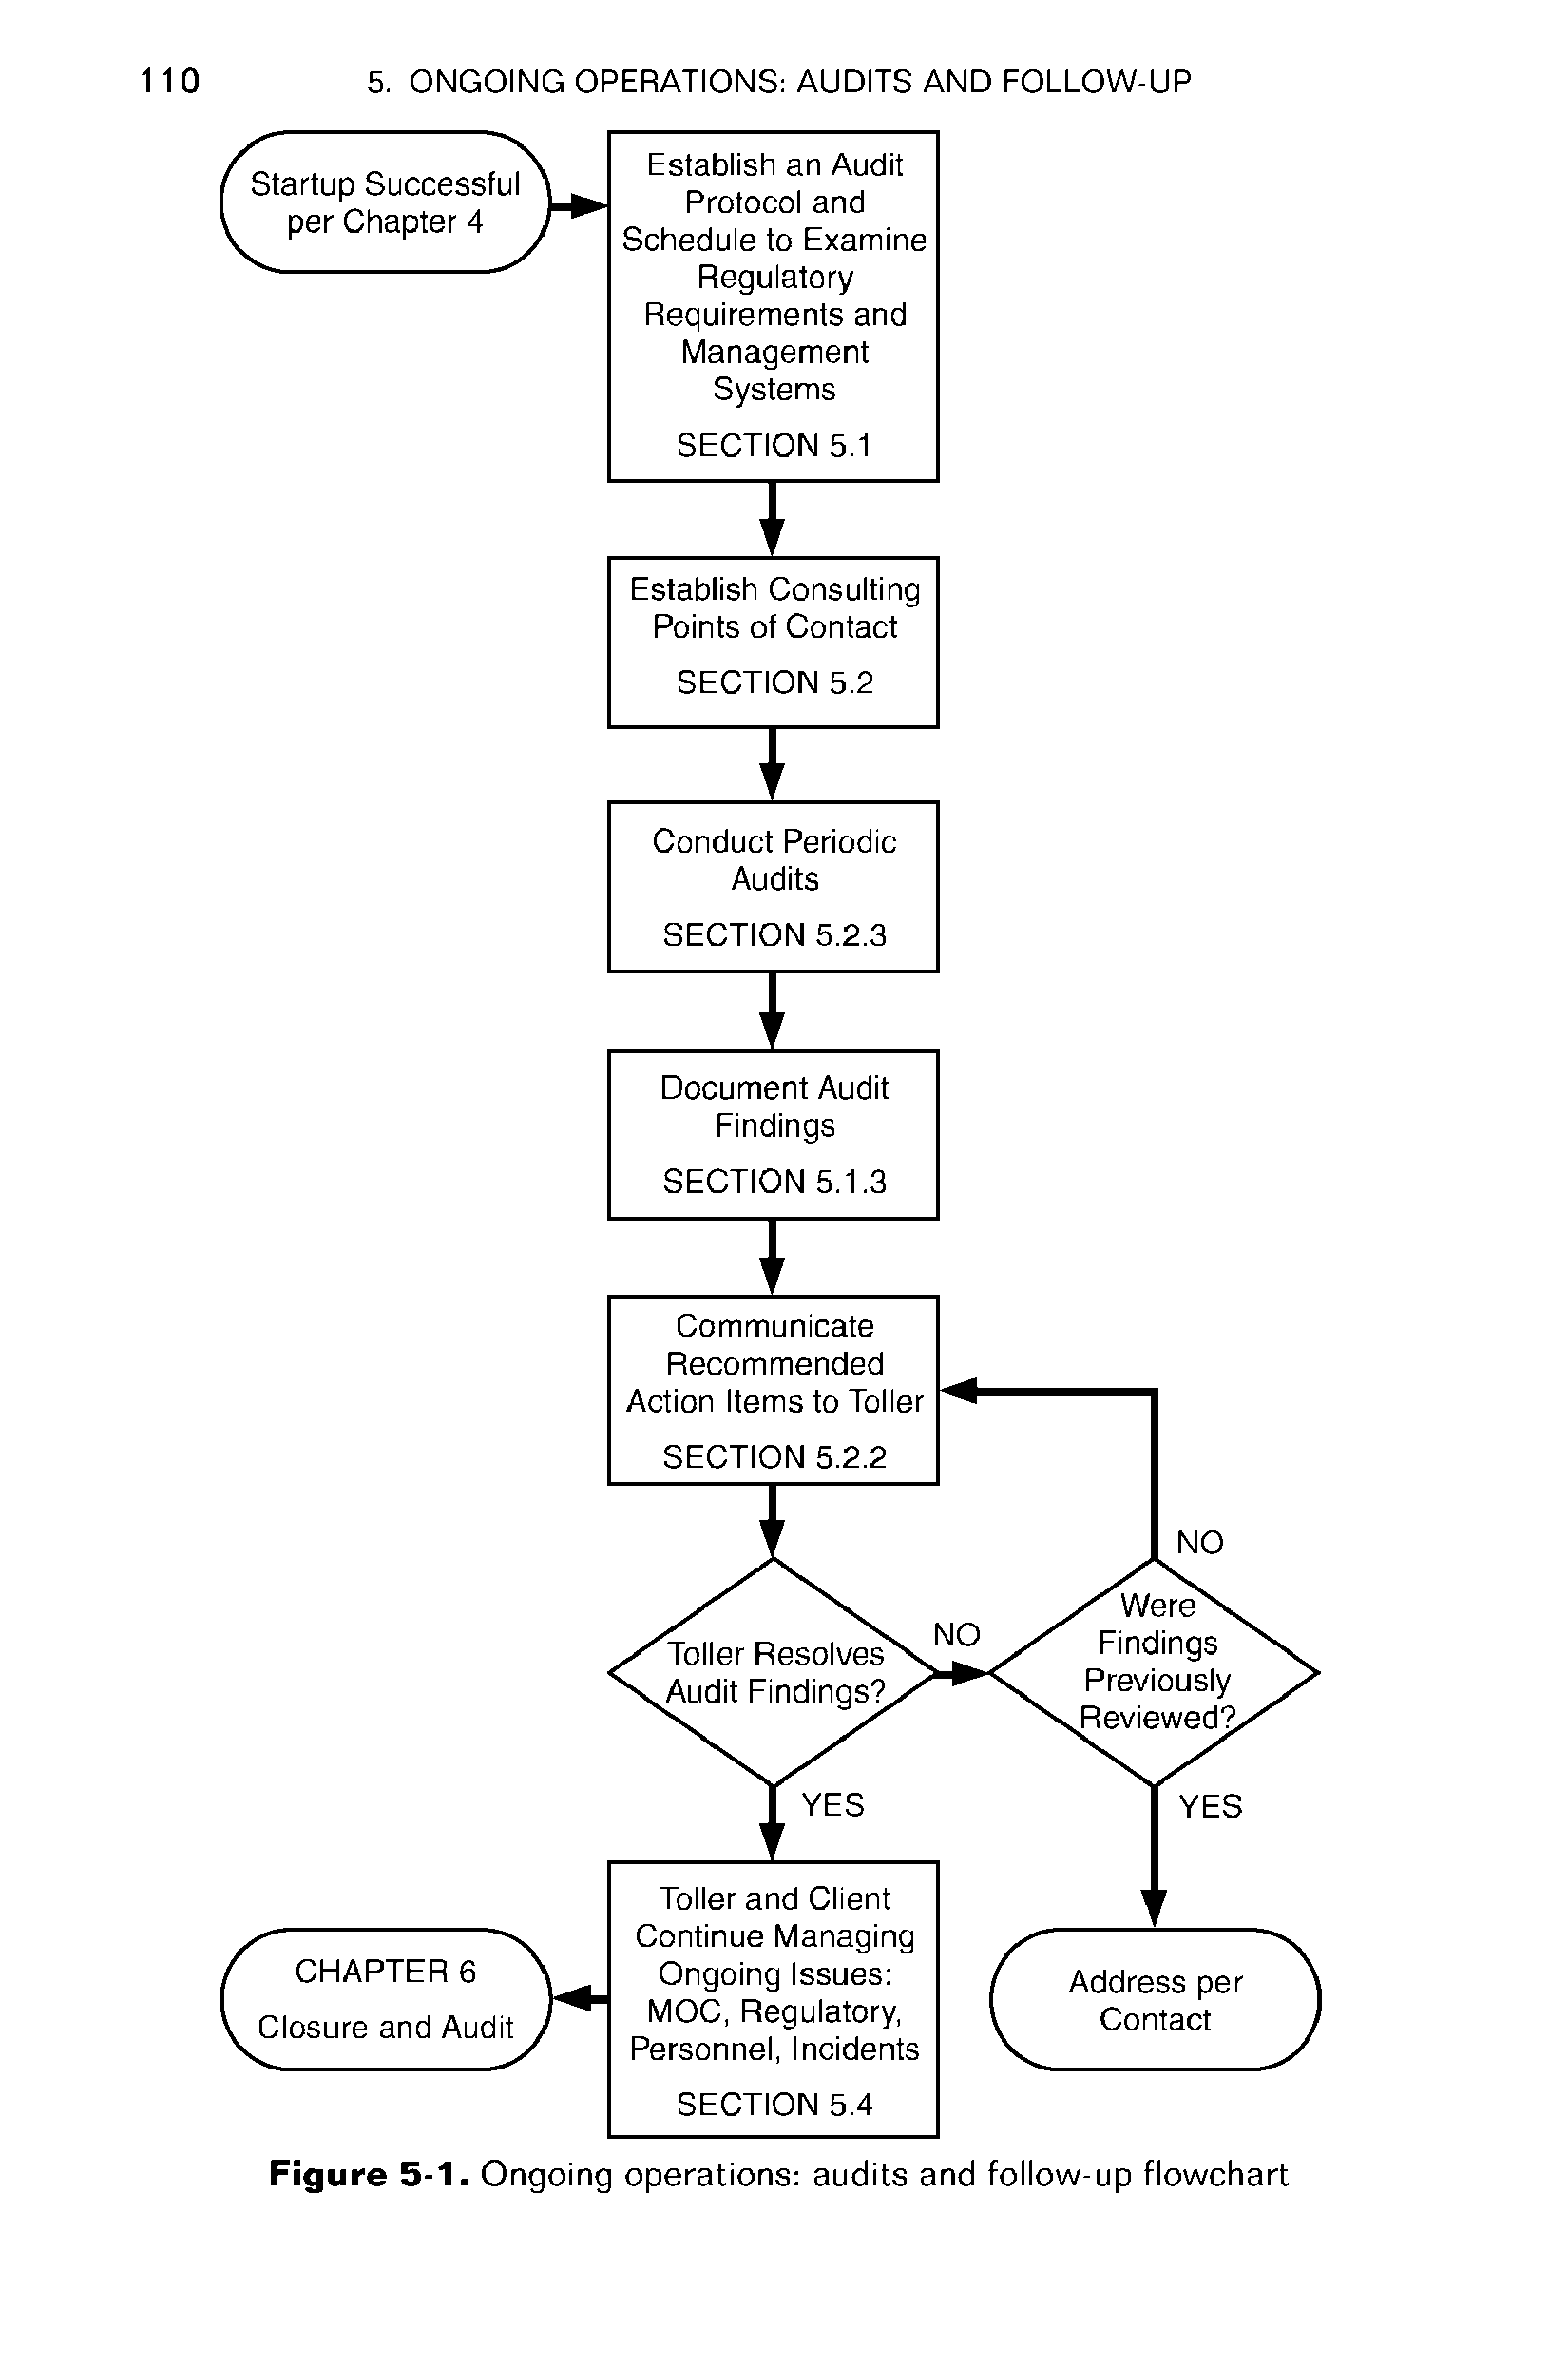 Figure 5-1. Ongoing operations audits and follow-up flowchart...